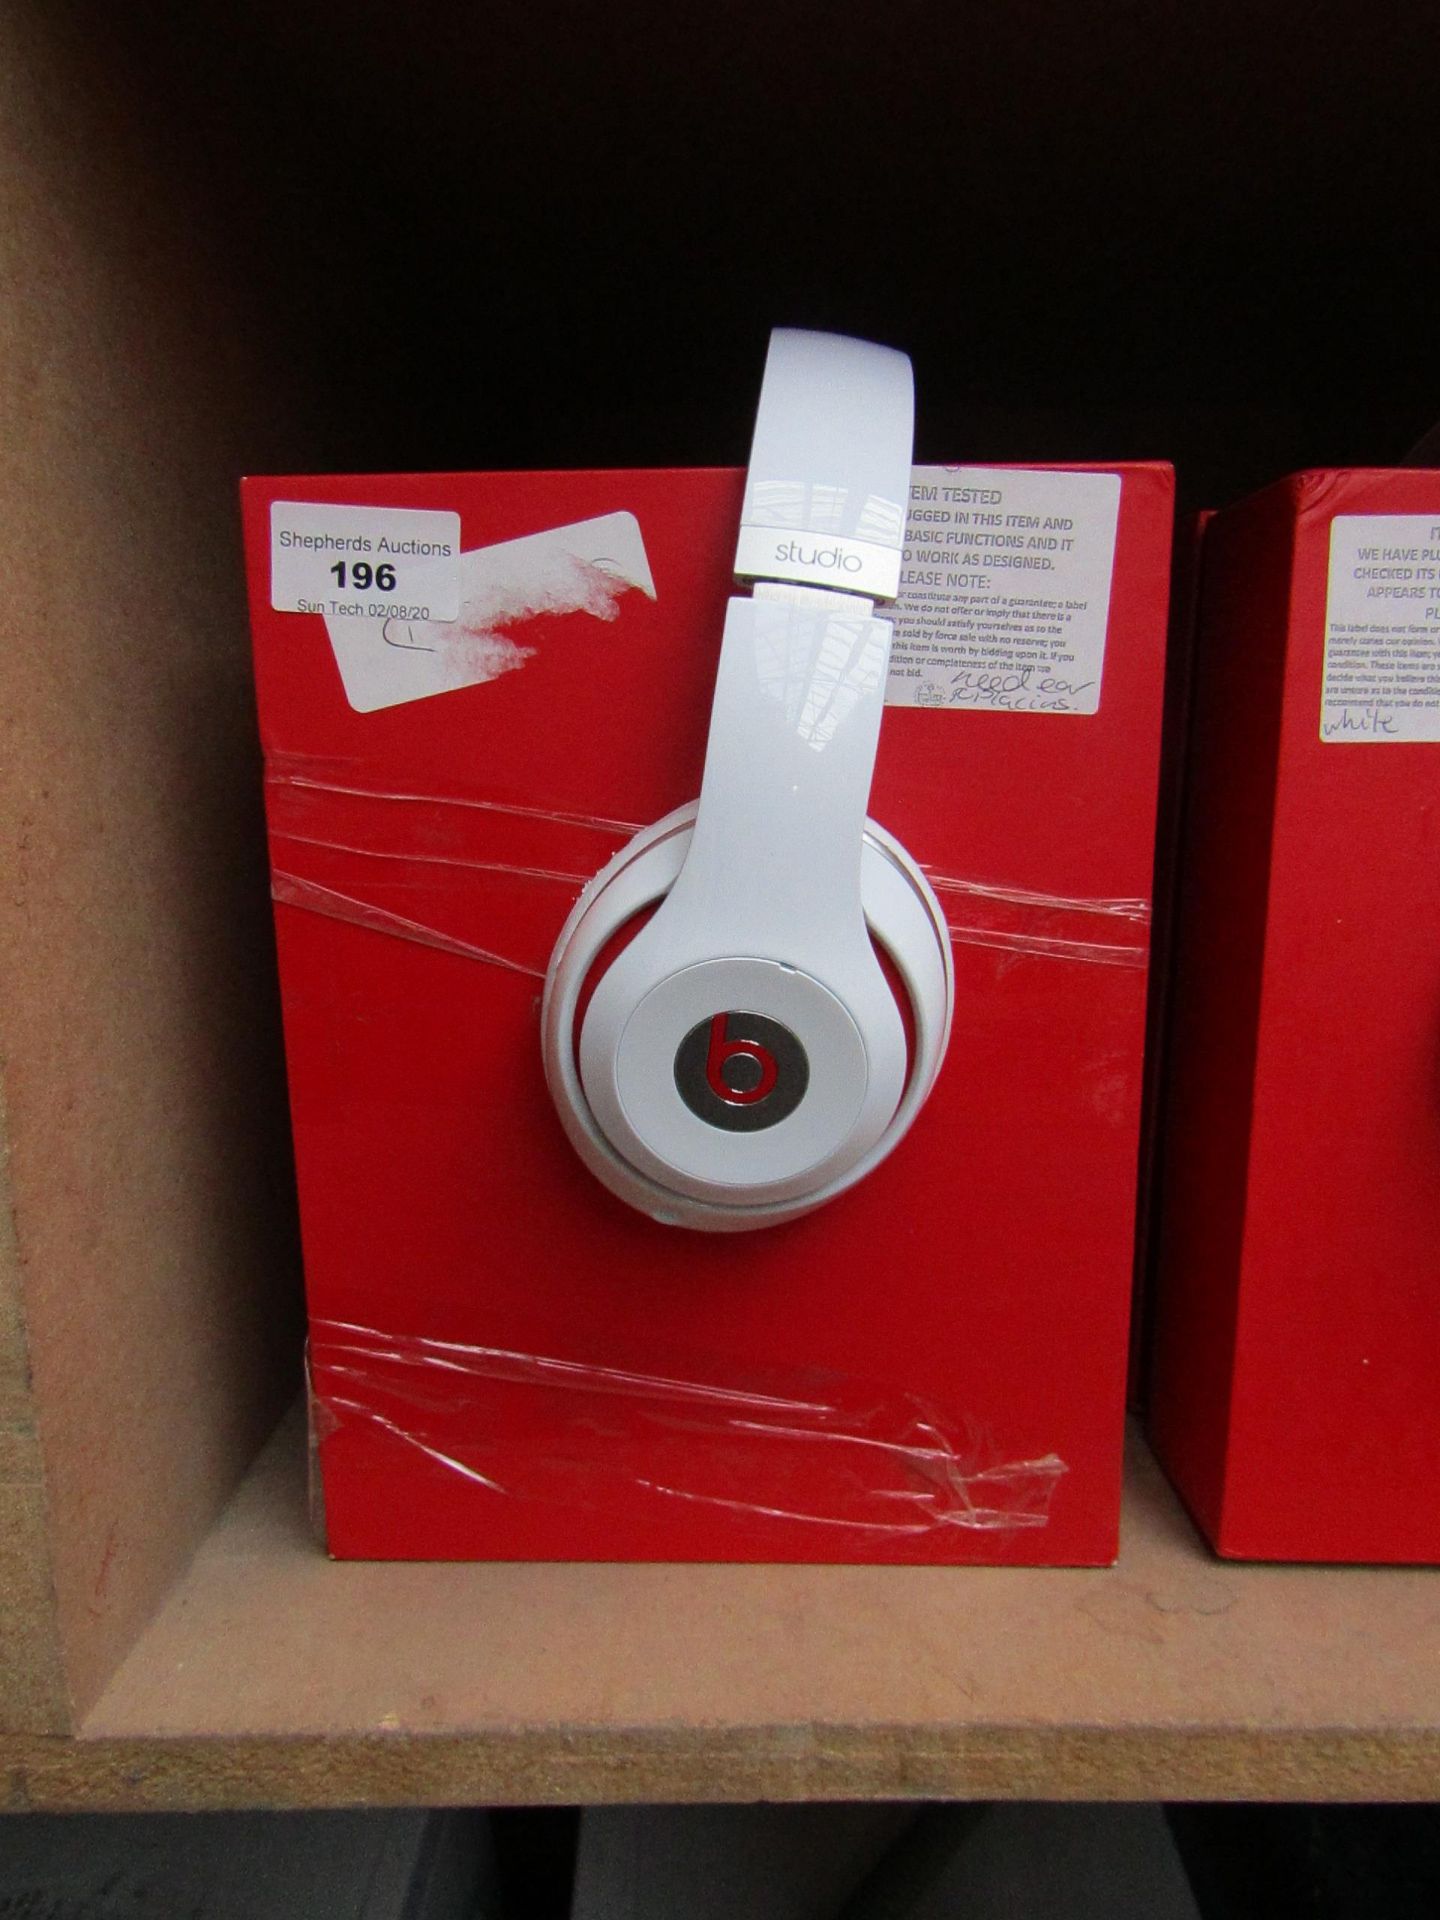 Beats Studio wired over-ear headphones, tested working but ear pads may need replacing. See